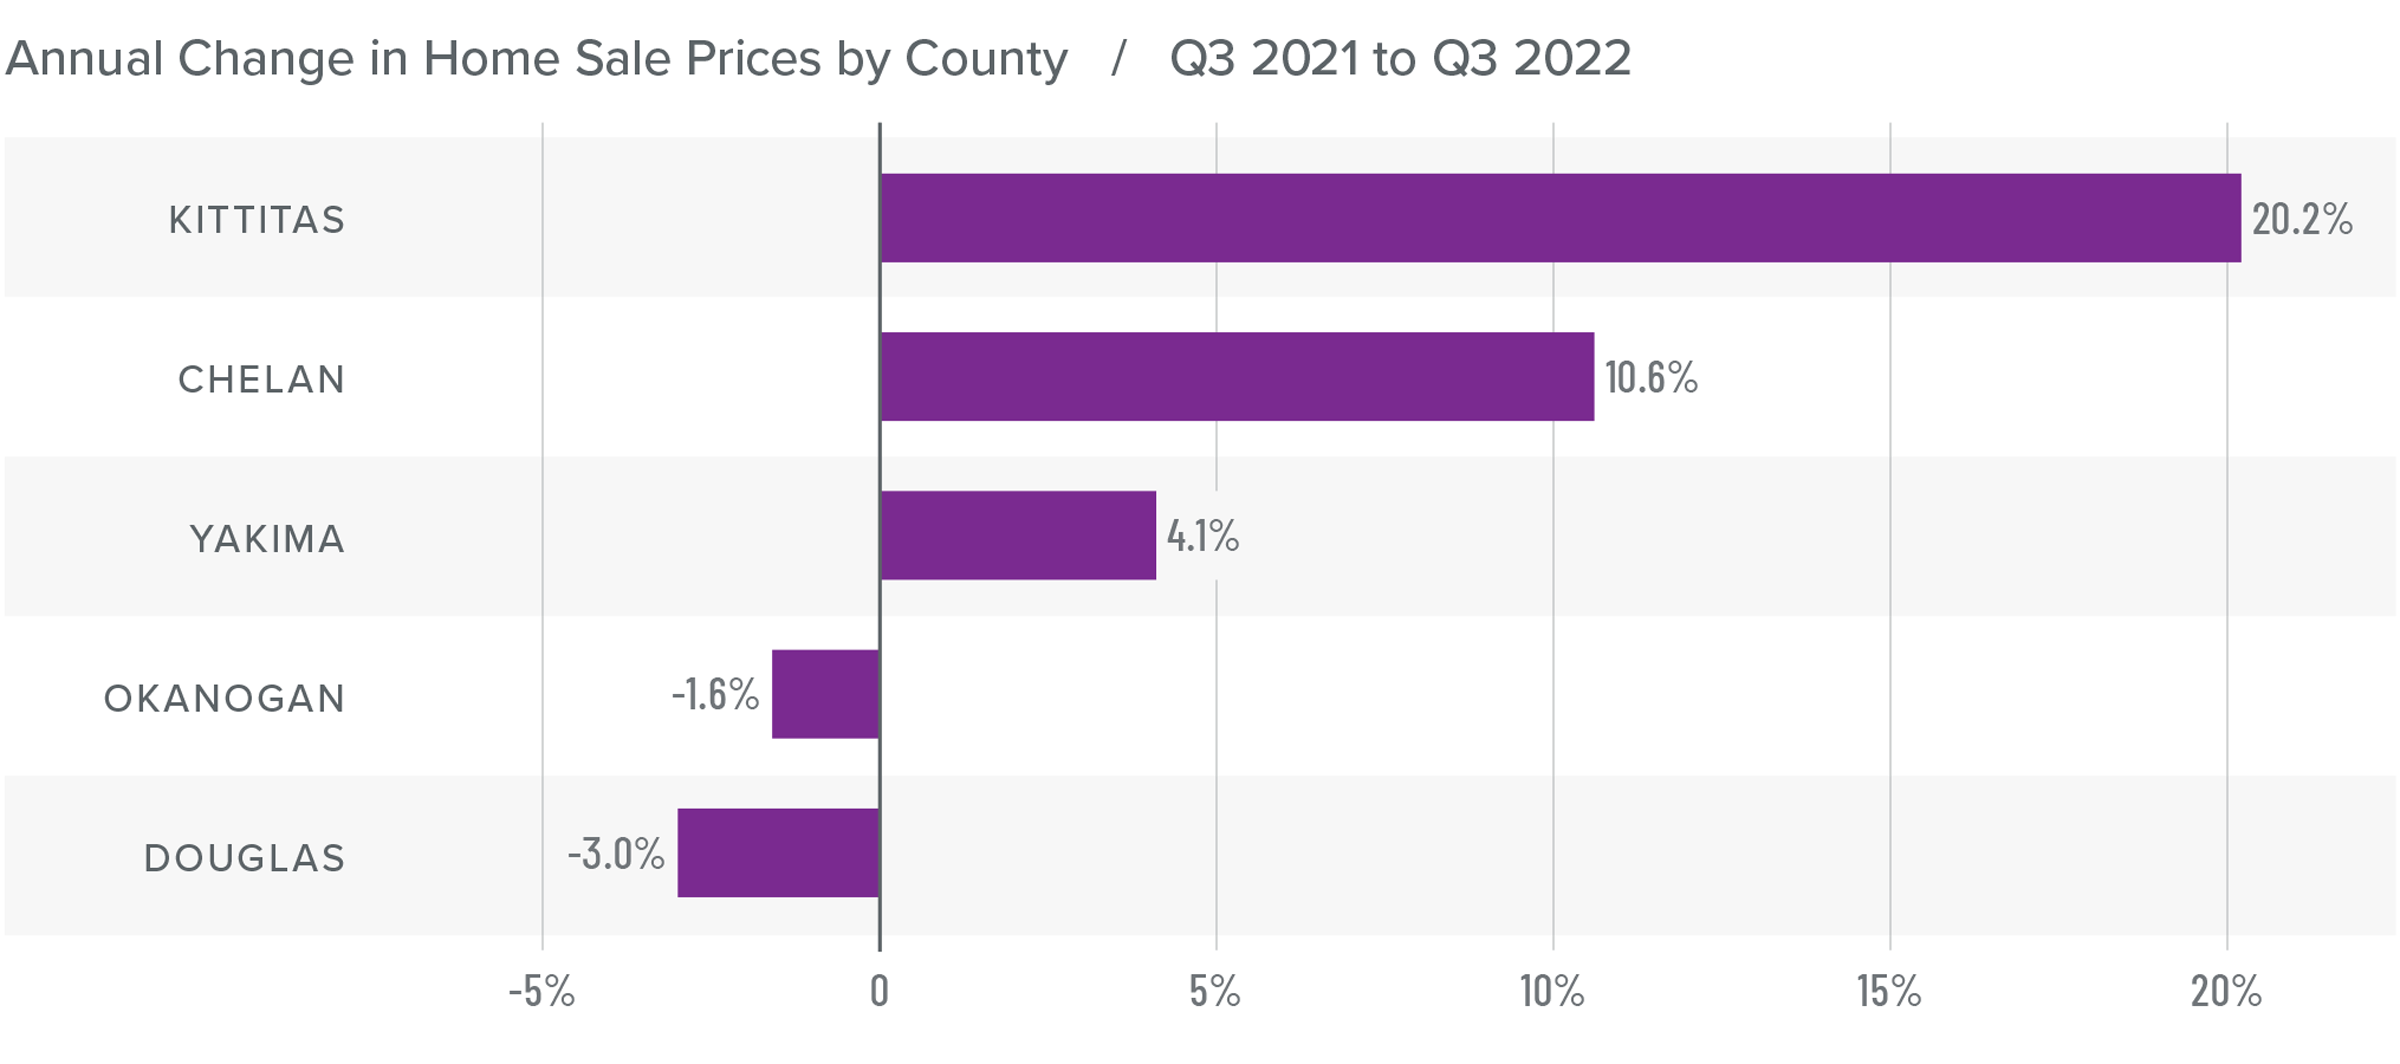 A bar graph showing the annual change in home sale prices for various counties in Central Washington from Q3 2021 to Q3 2022. Kittitas County tops the list at 20.2%, followed by Chelan at 10.6%, Yakima at 4.1%, Okanogan at -1.6%, and Douglas at -3%.